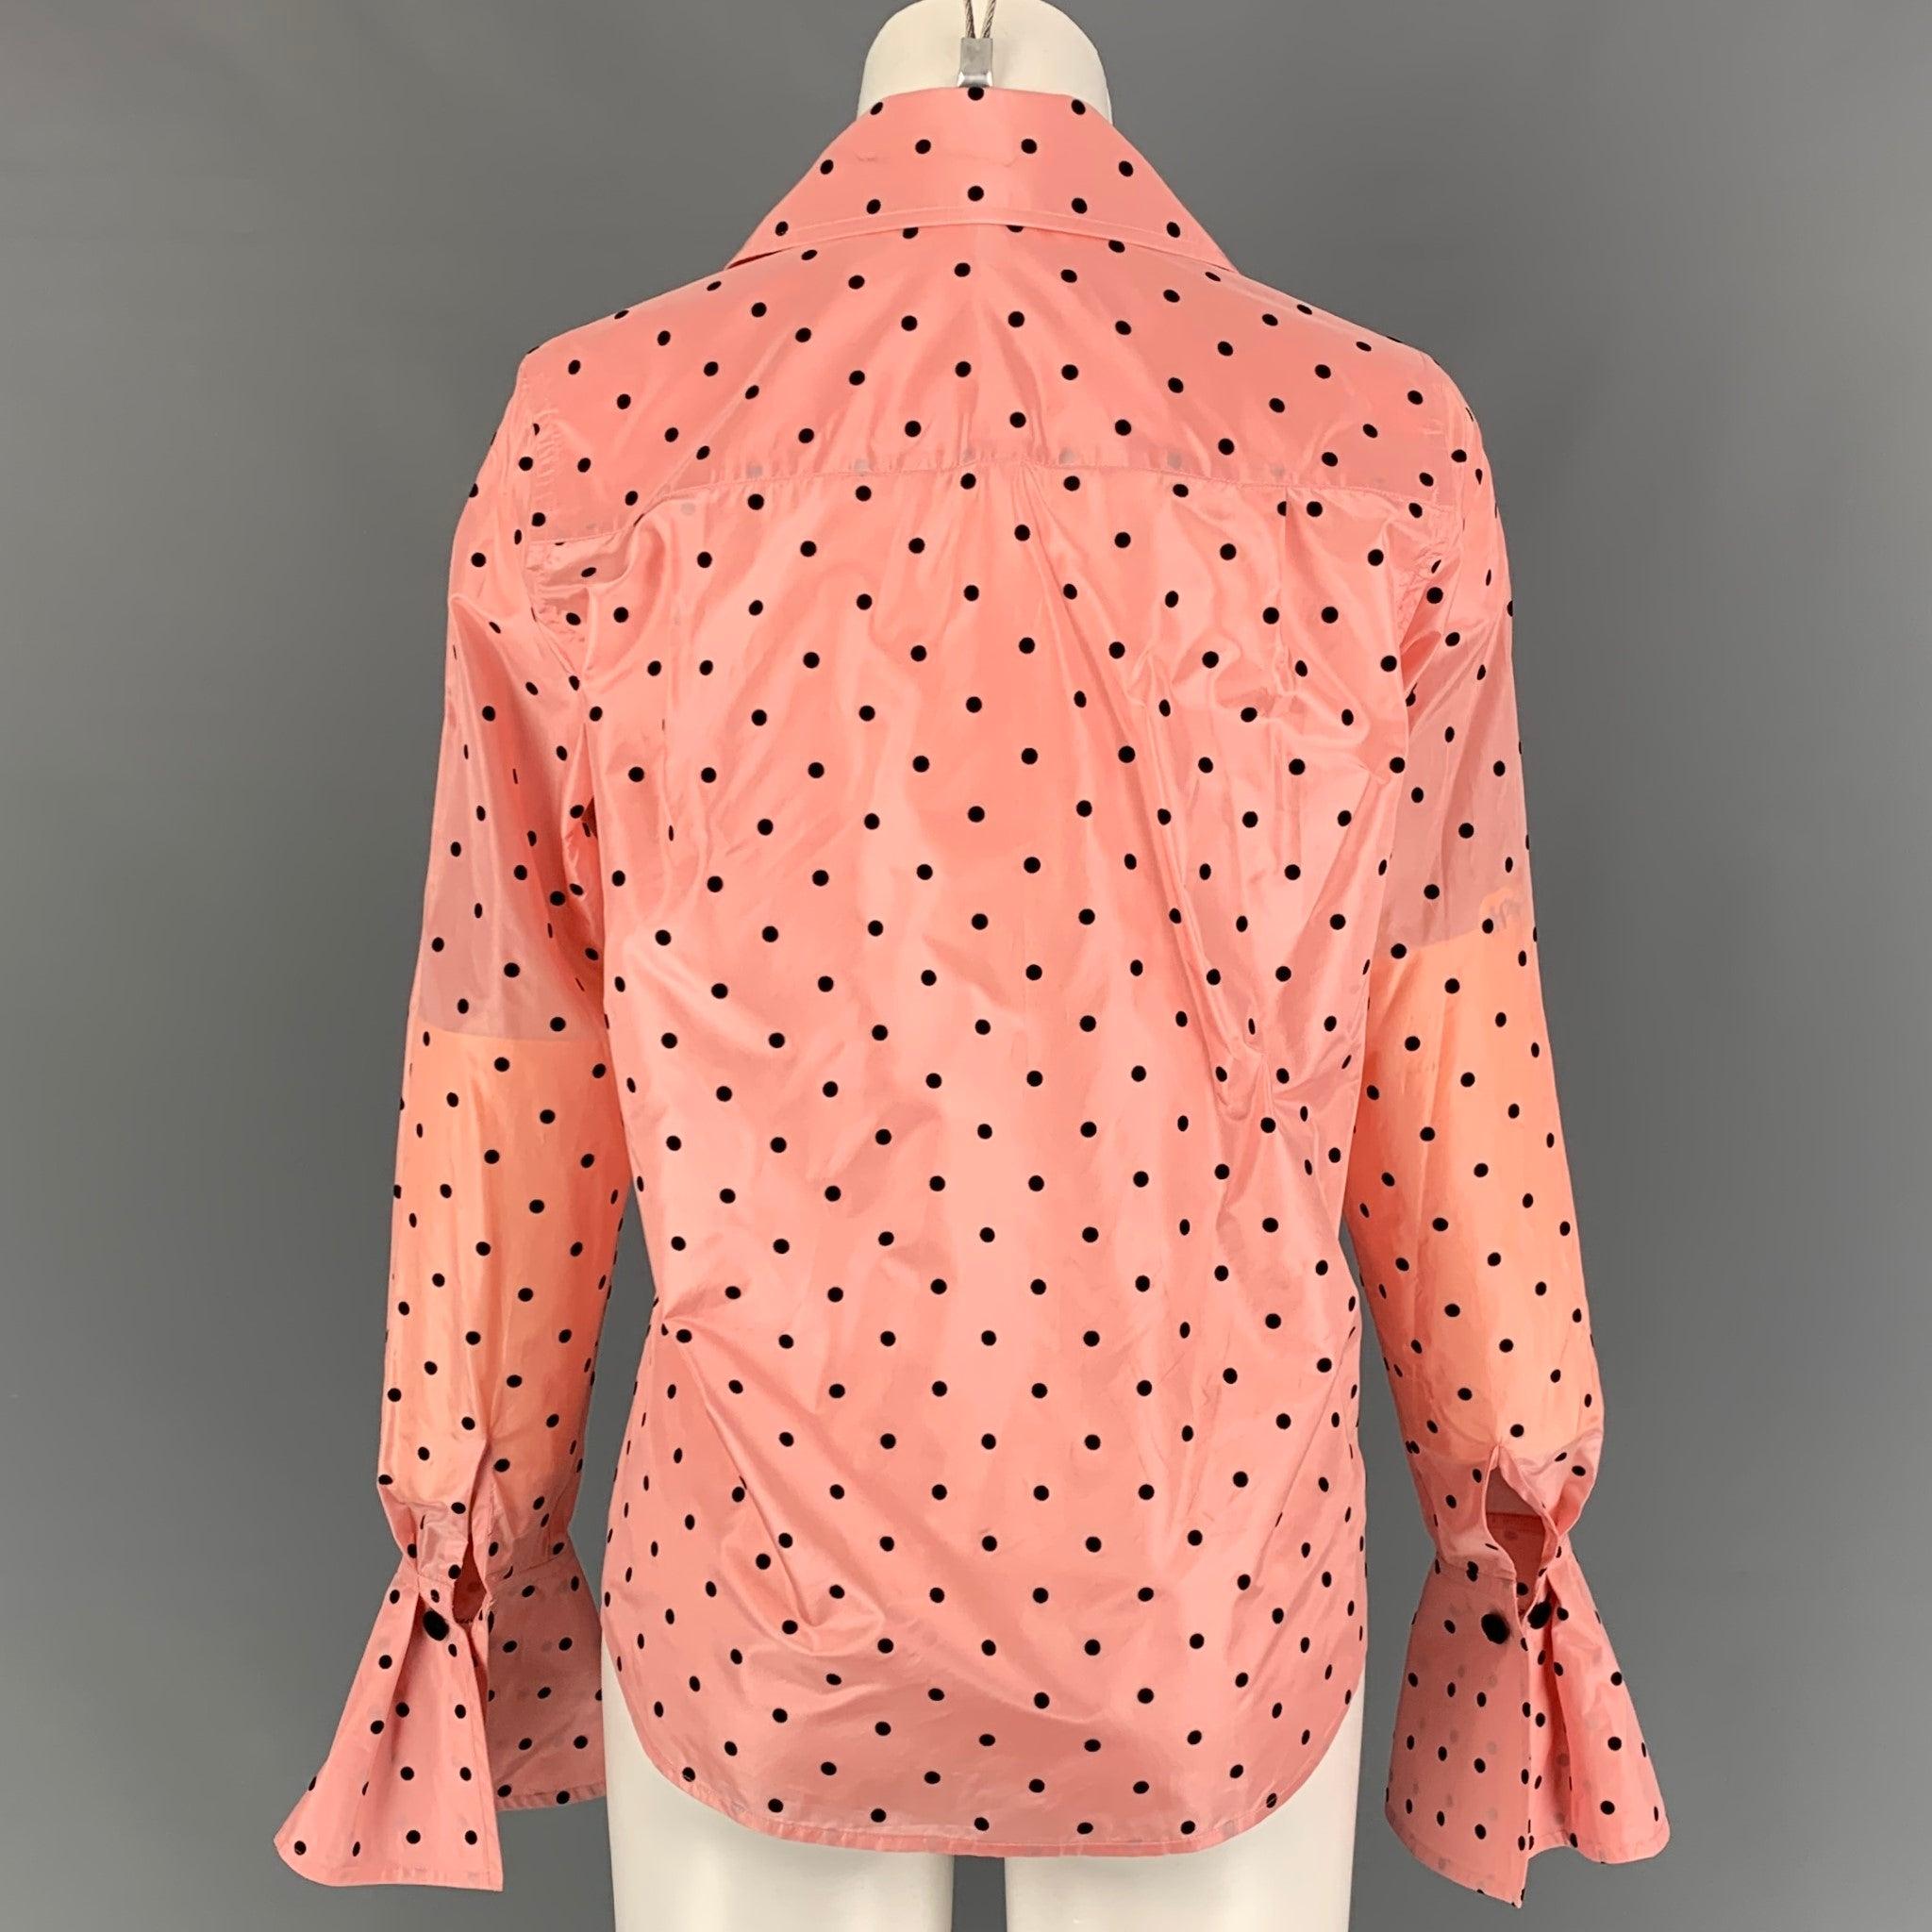 MARC JACOBS Size 0 Pink Black Silk Polka Dot Buttoned Shirt In Good Condition For Sale In San Francisco, CA